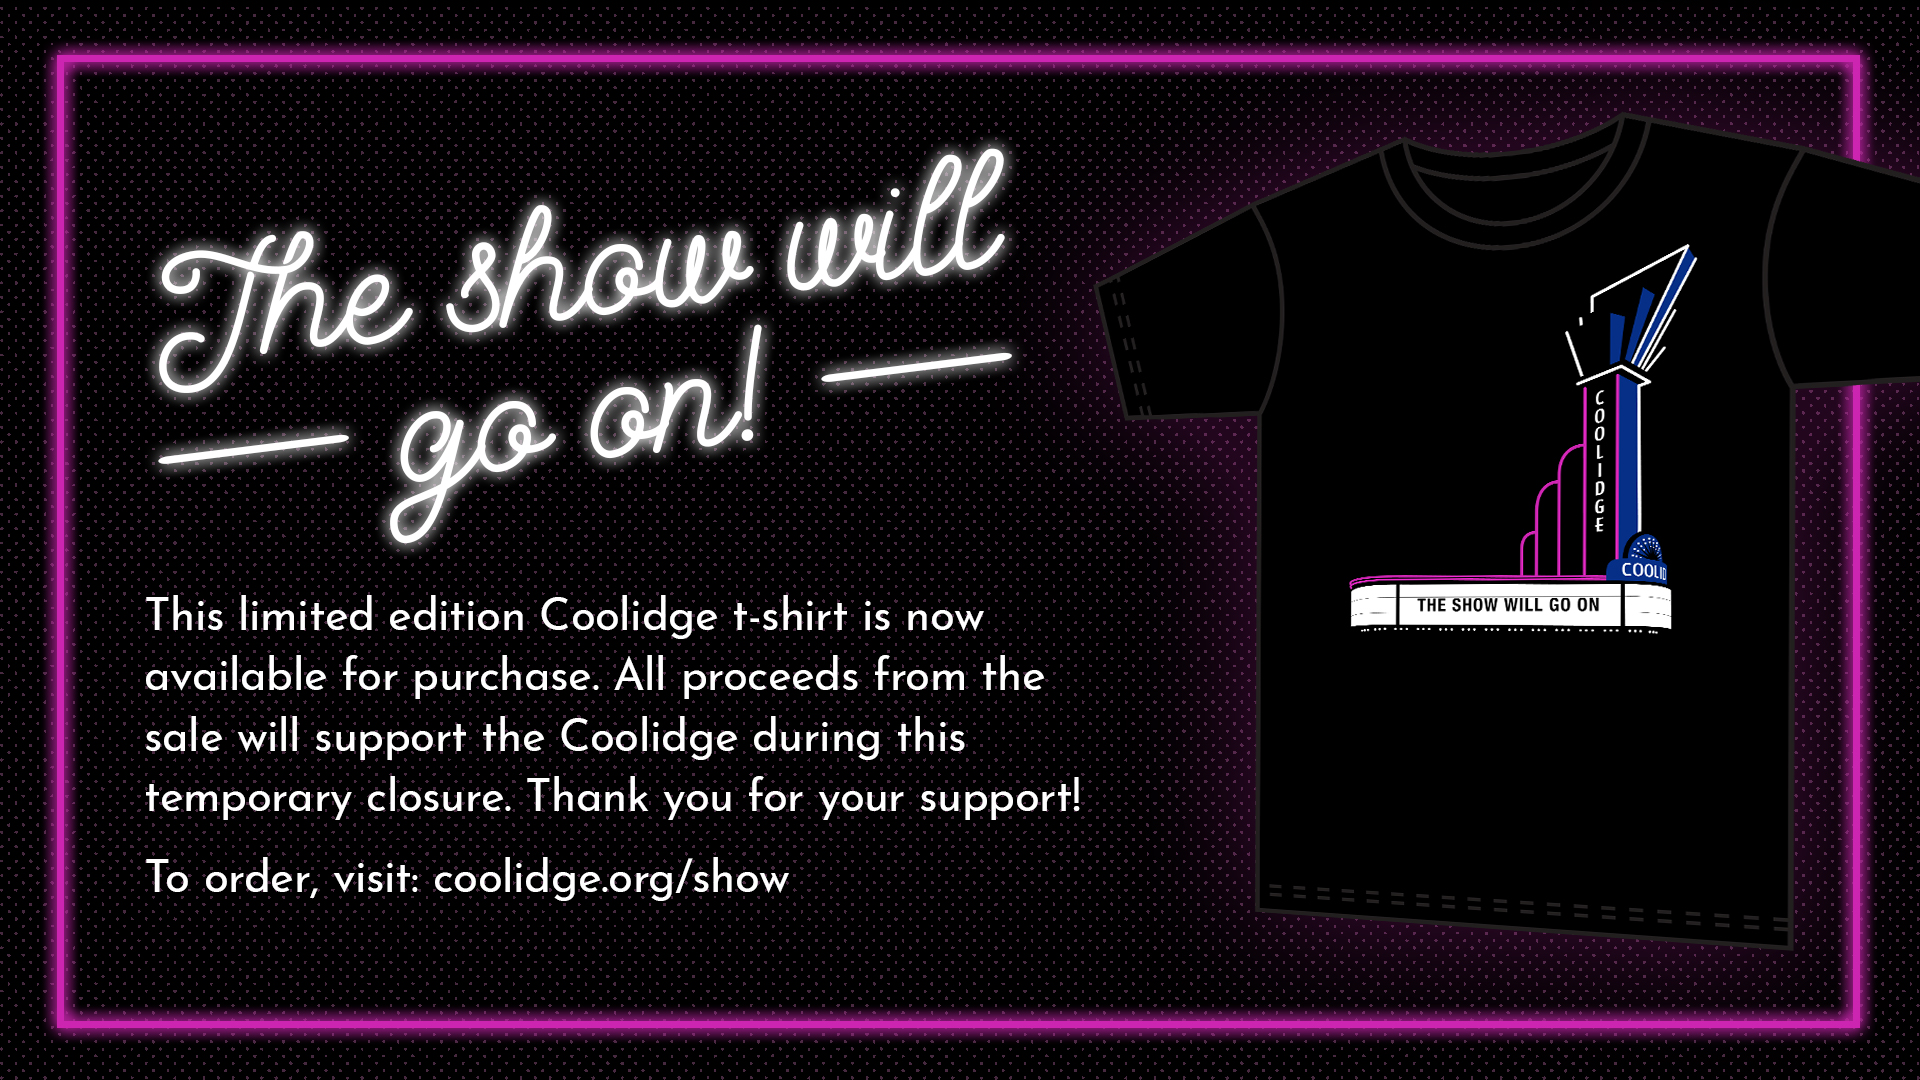 Limited edition Coolidge T-shirt now on sale